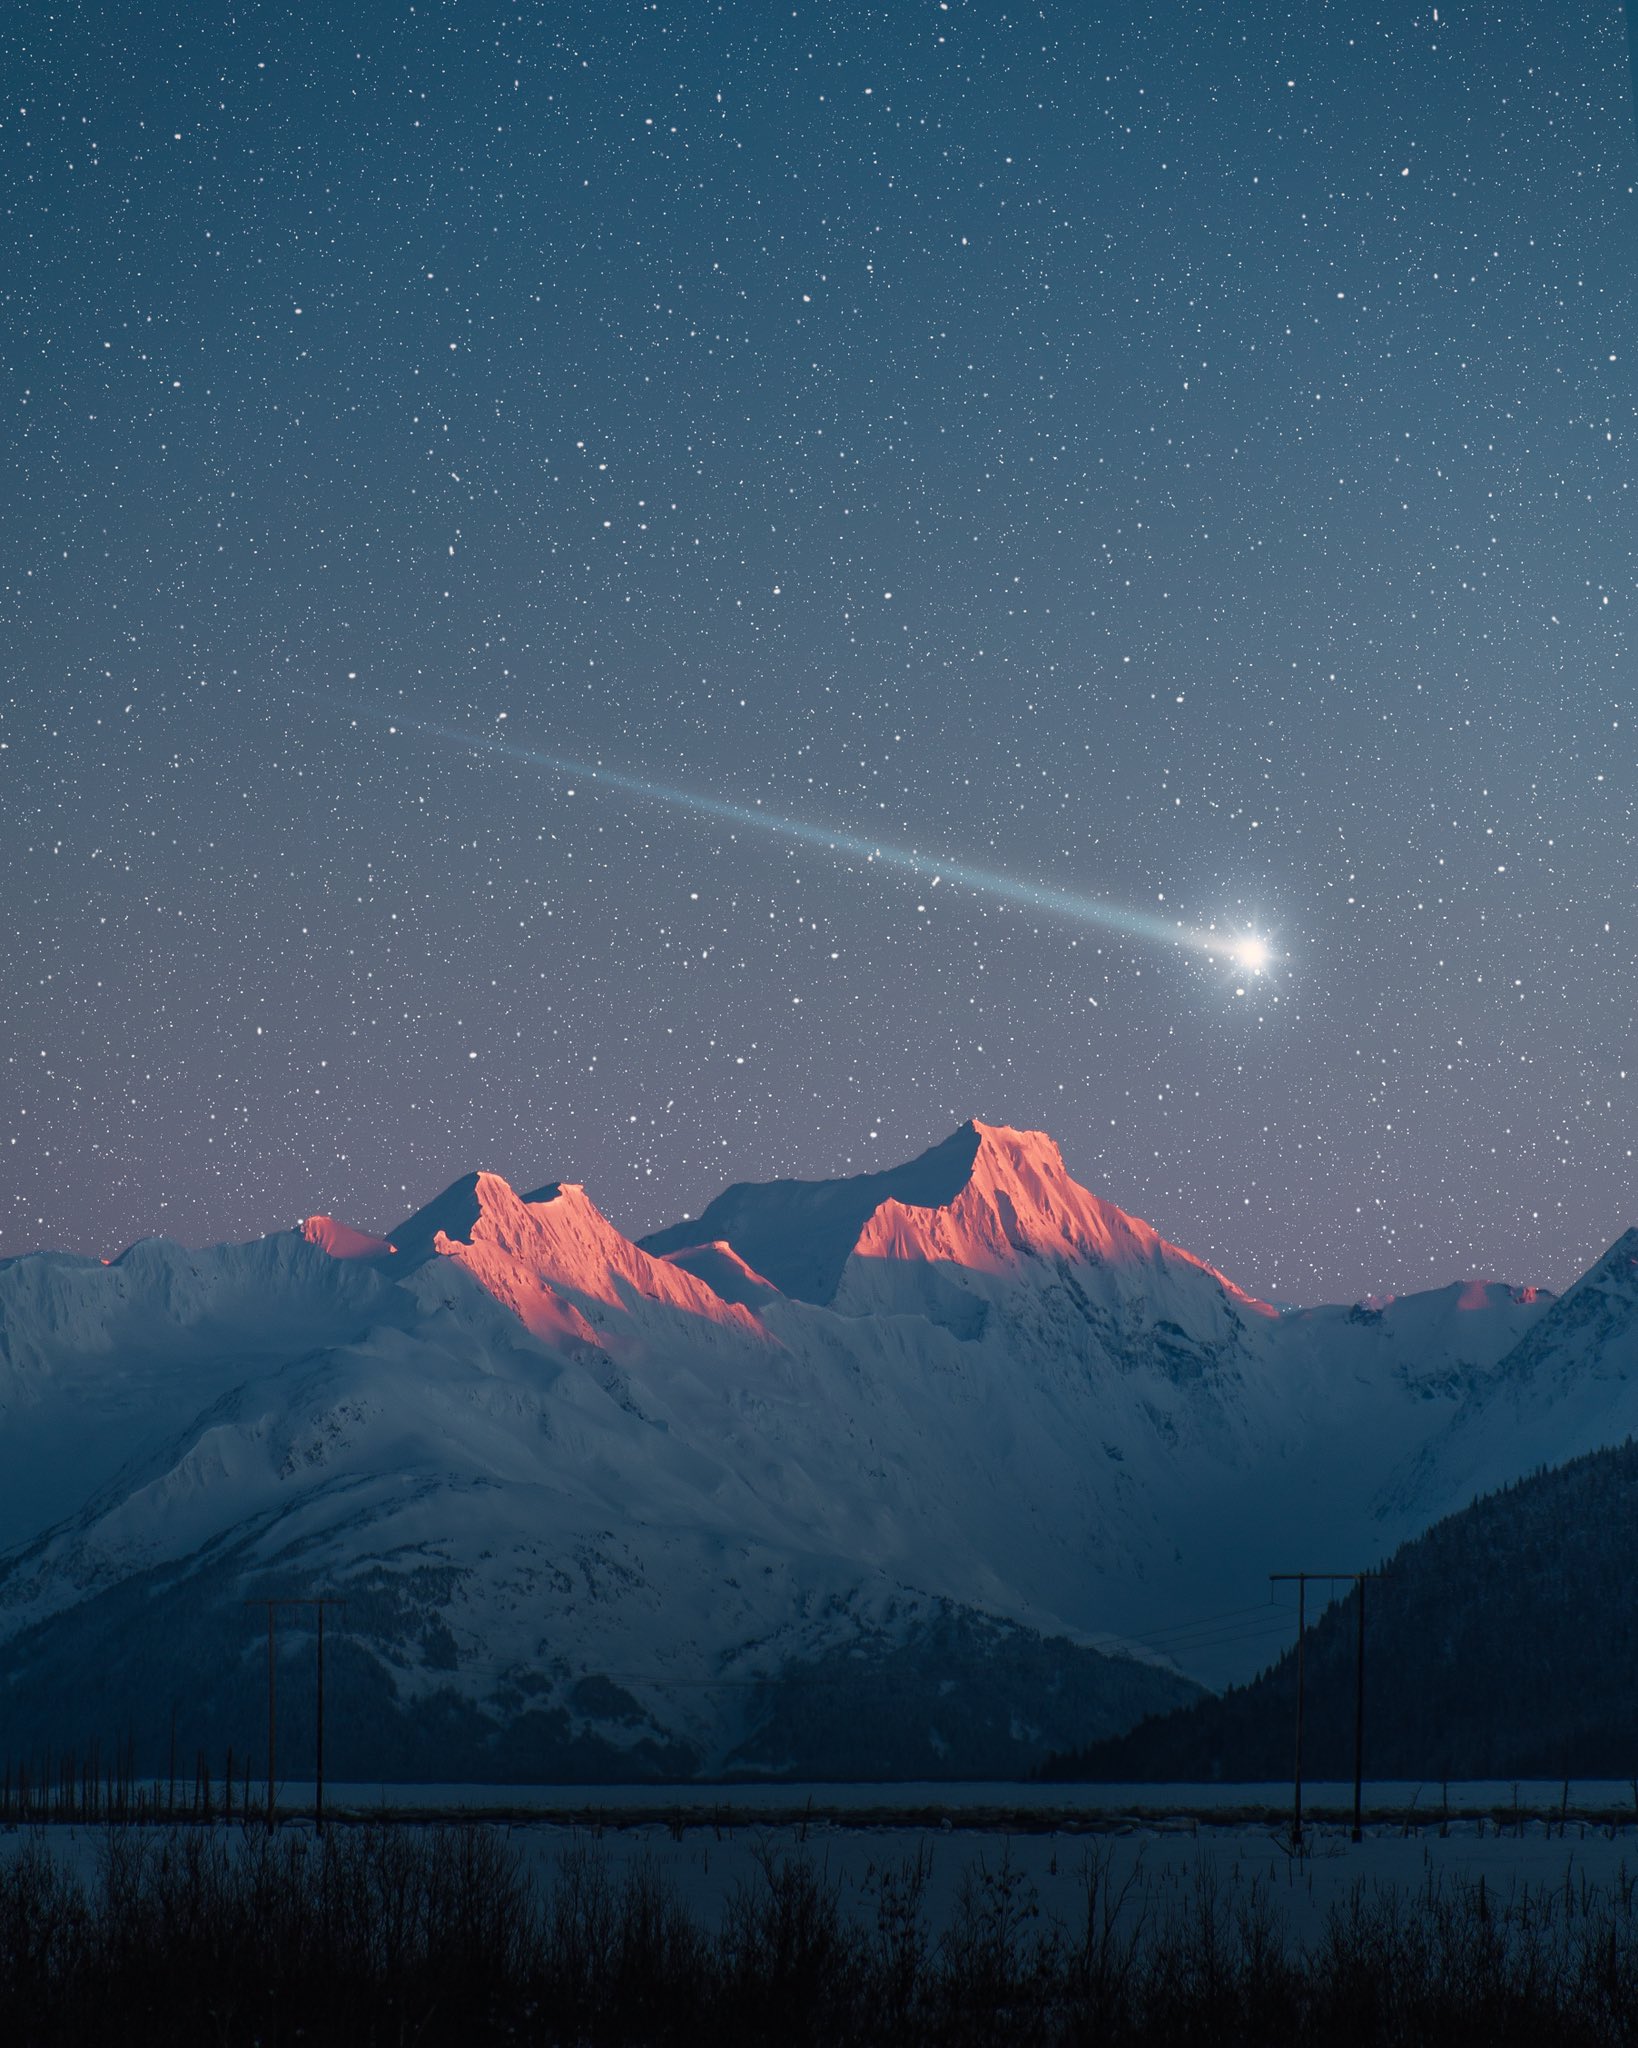 General 1638x2048 landscape mountains snowy mountain stars shooting stars portrait display